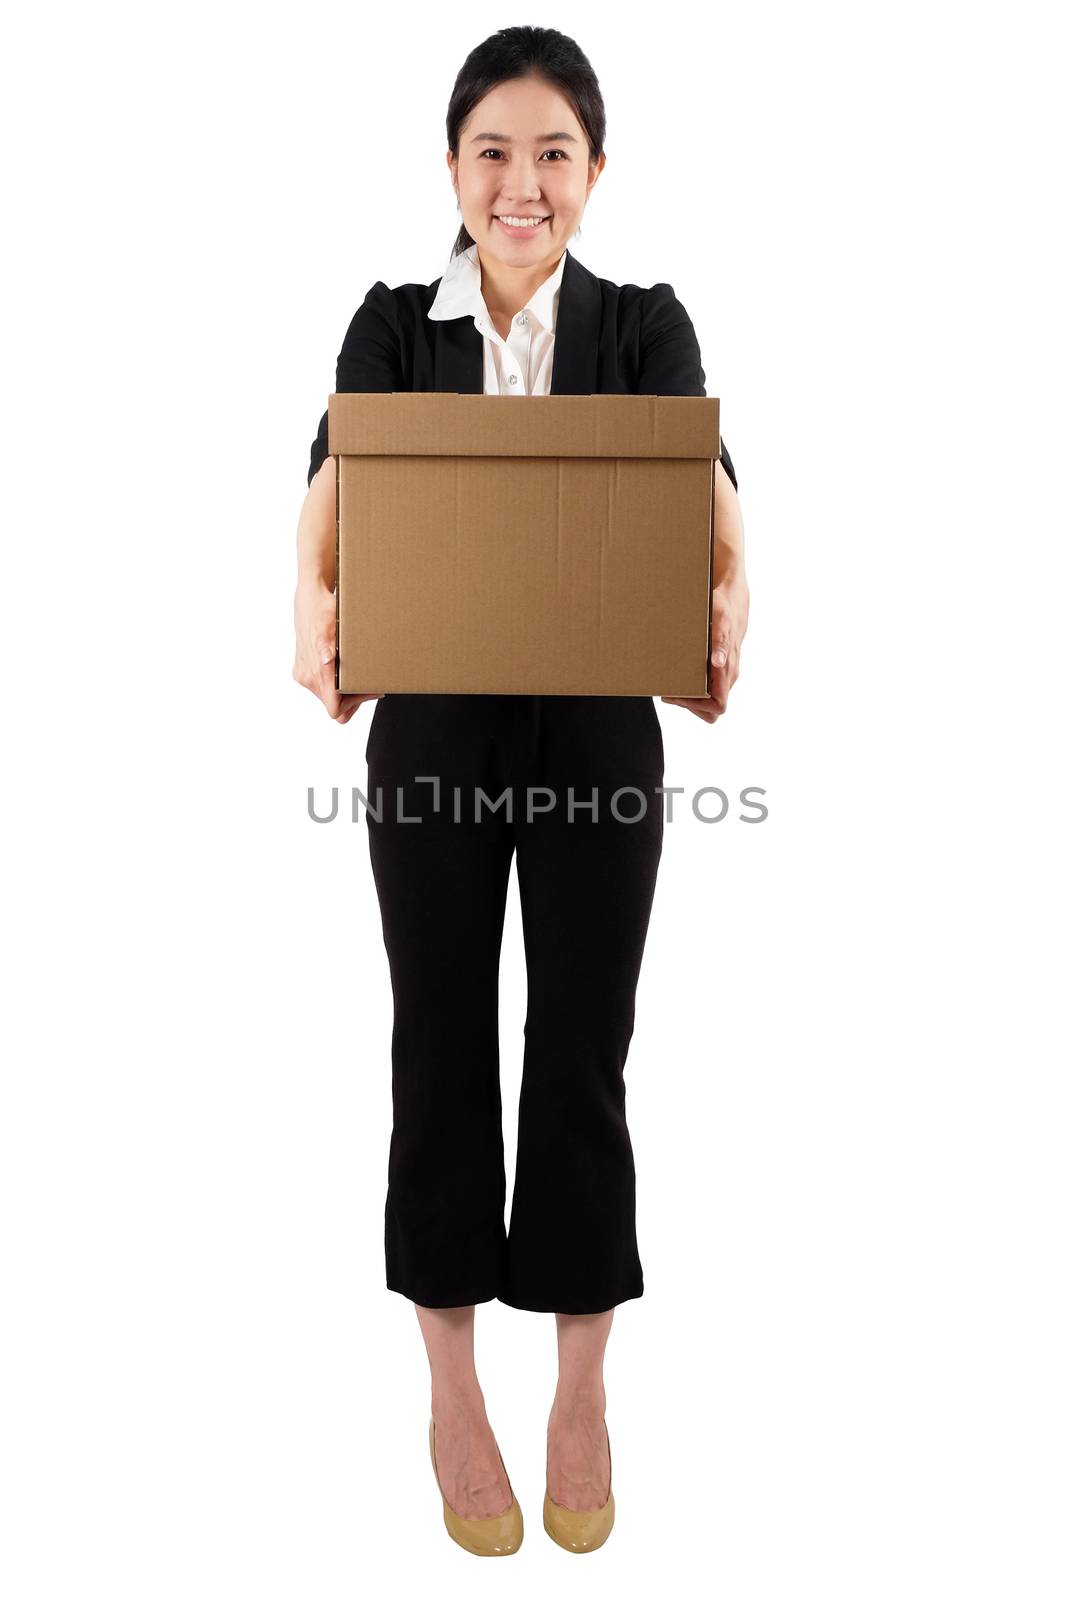 A young woman carrying a box